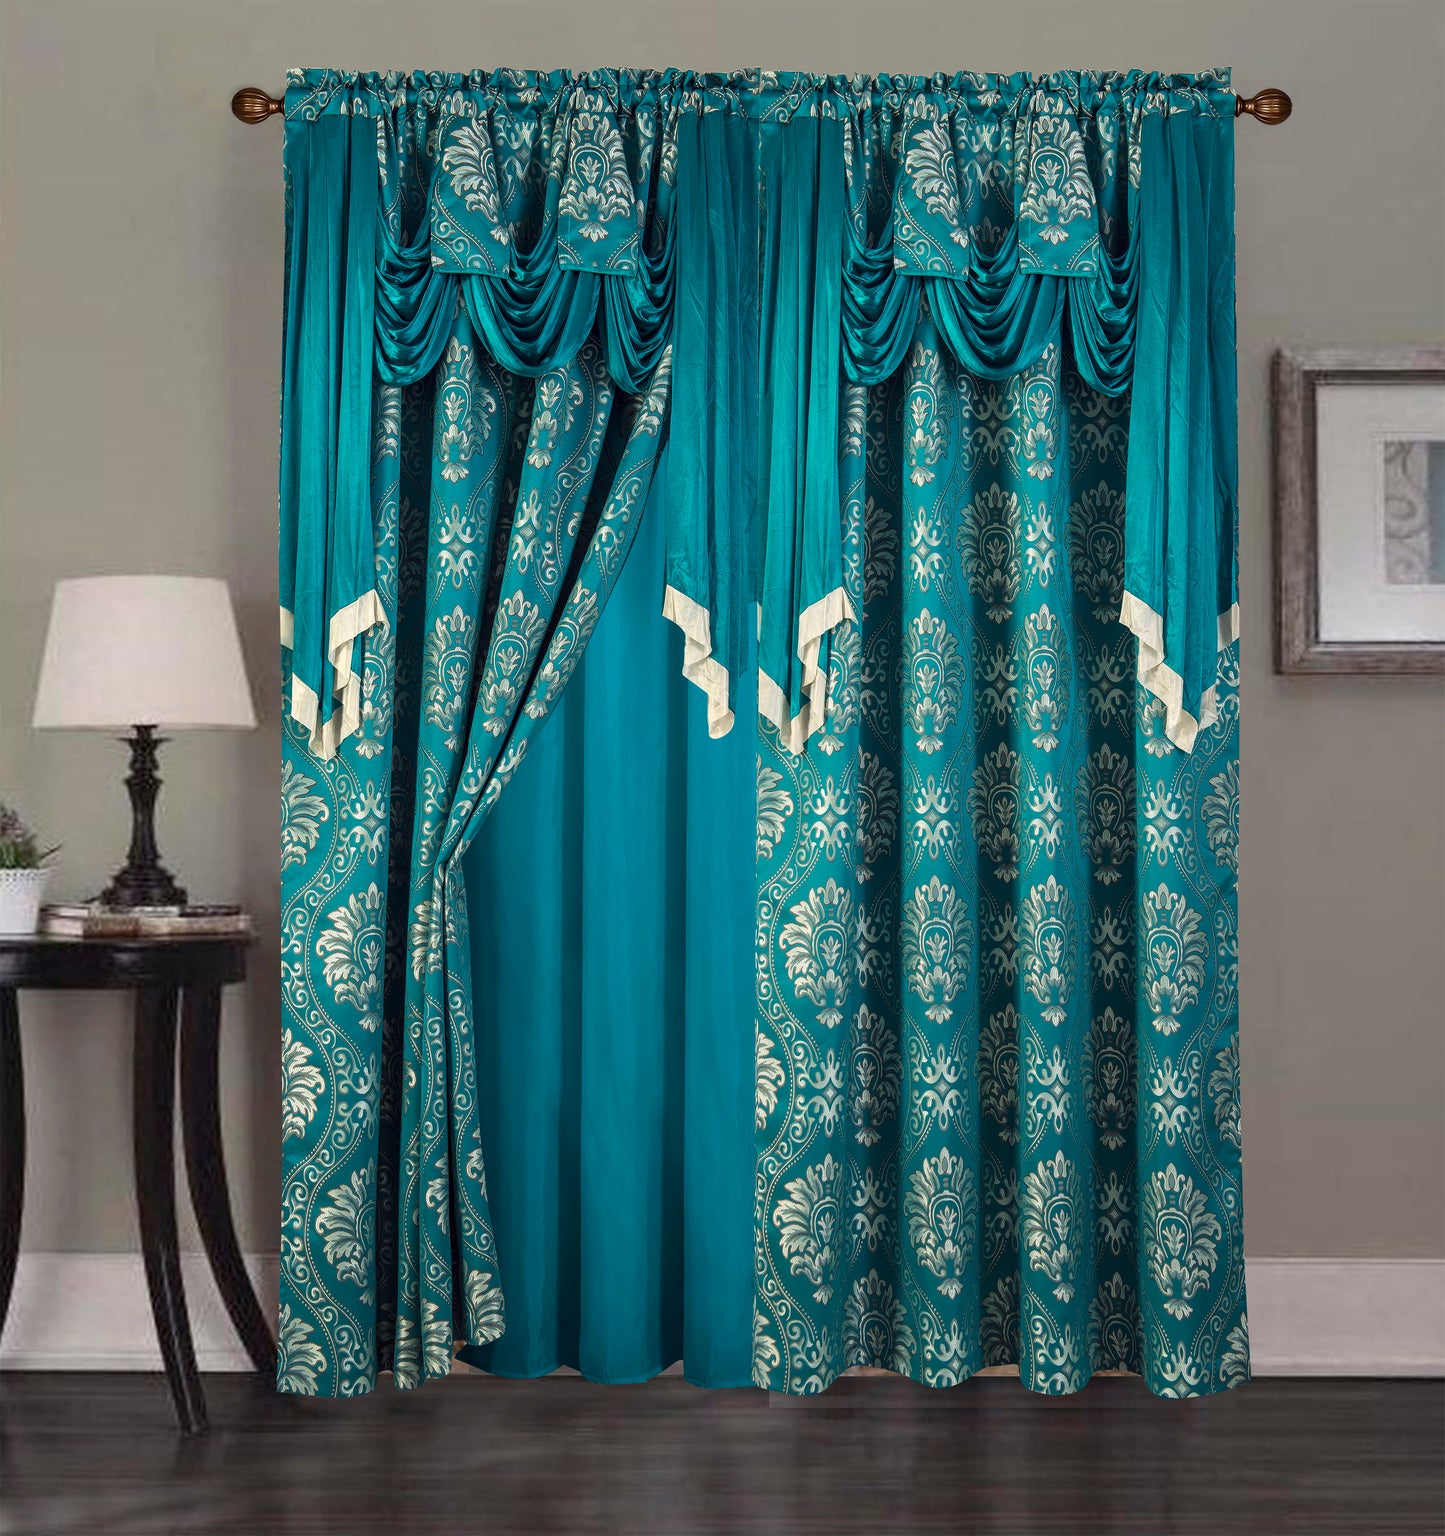 2PC CURTAIN SET W/ ATTACHED VALANCE & BACKING - Skyler